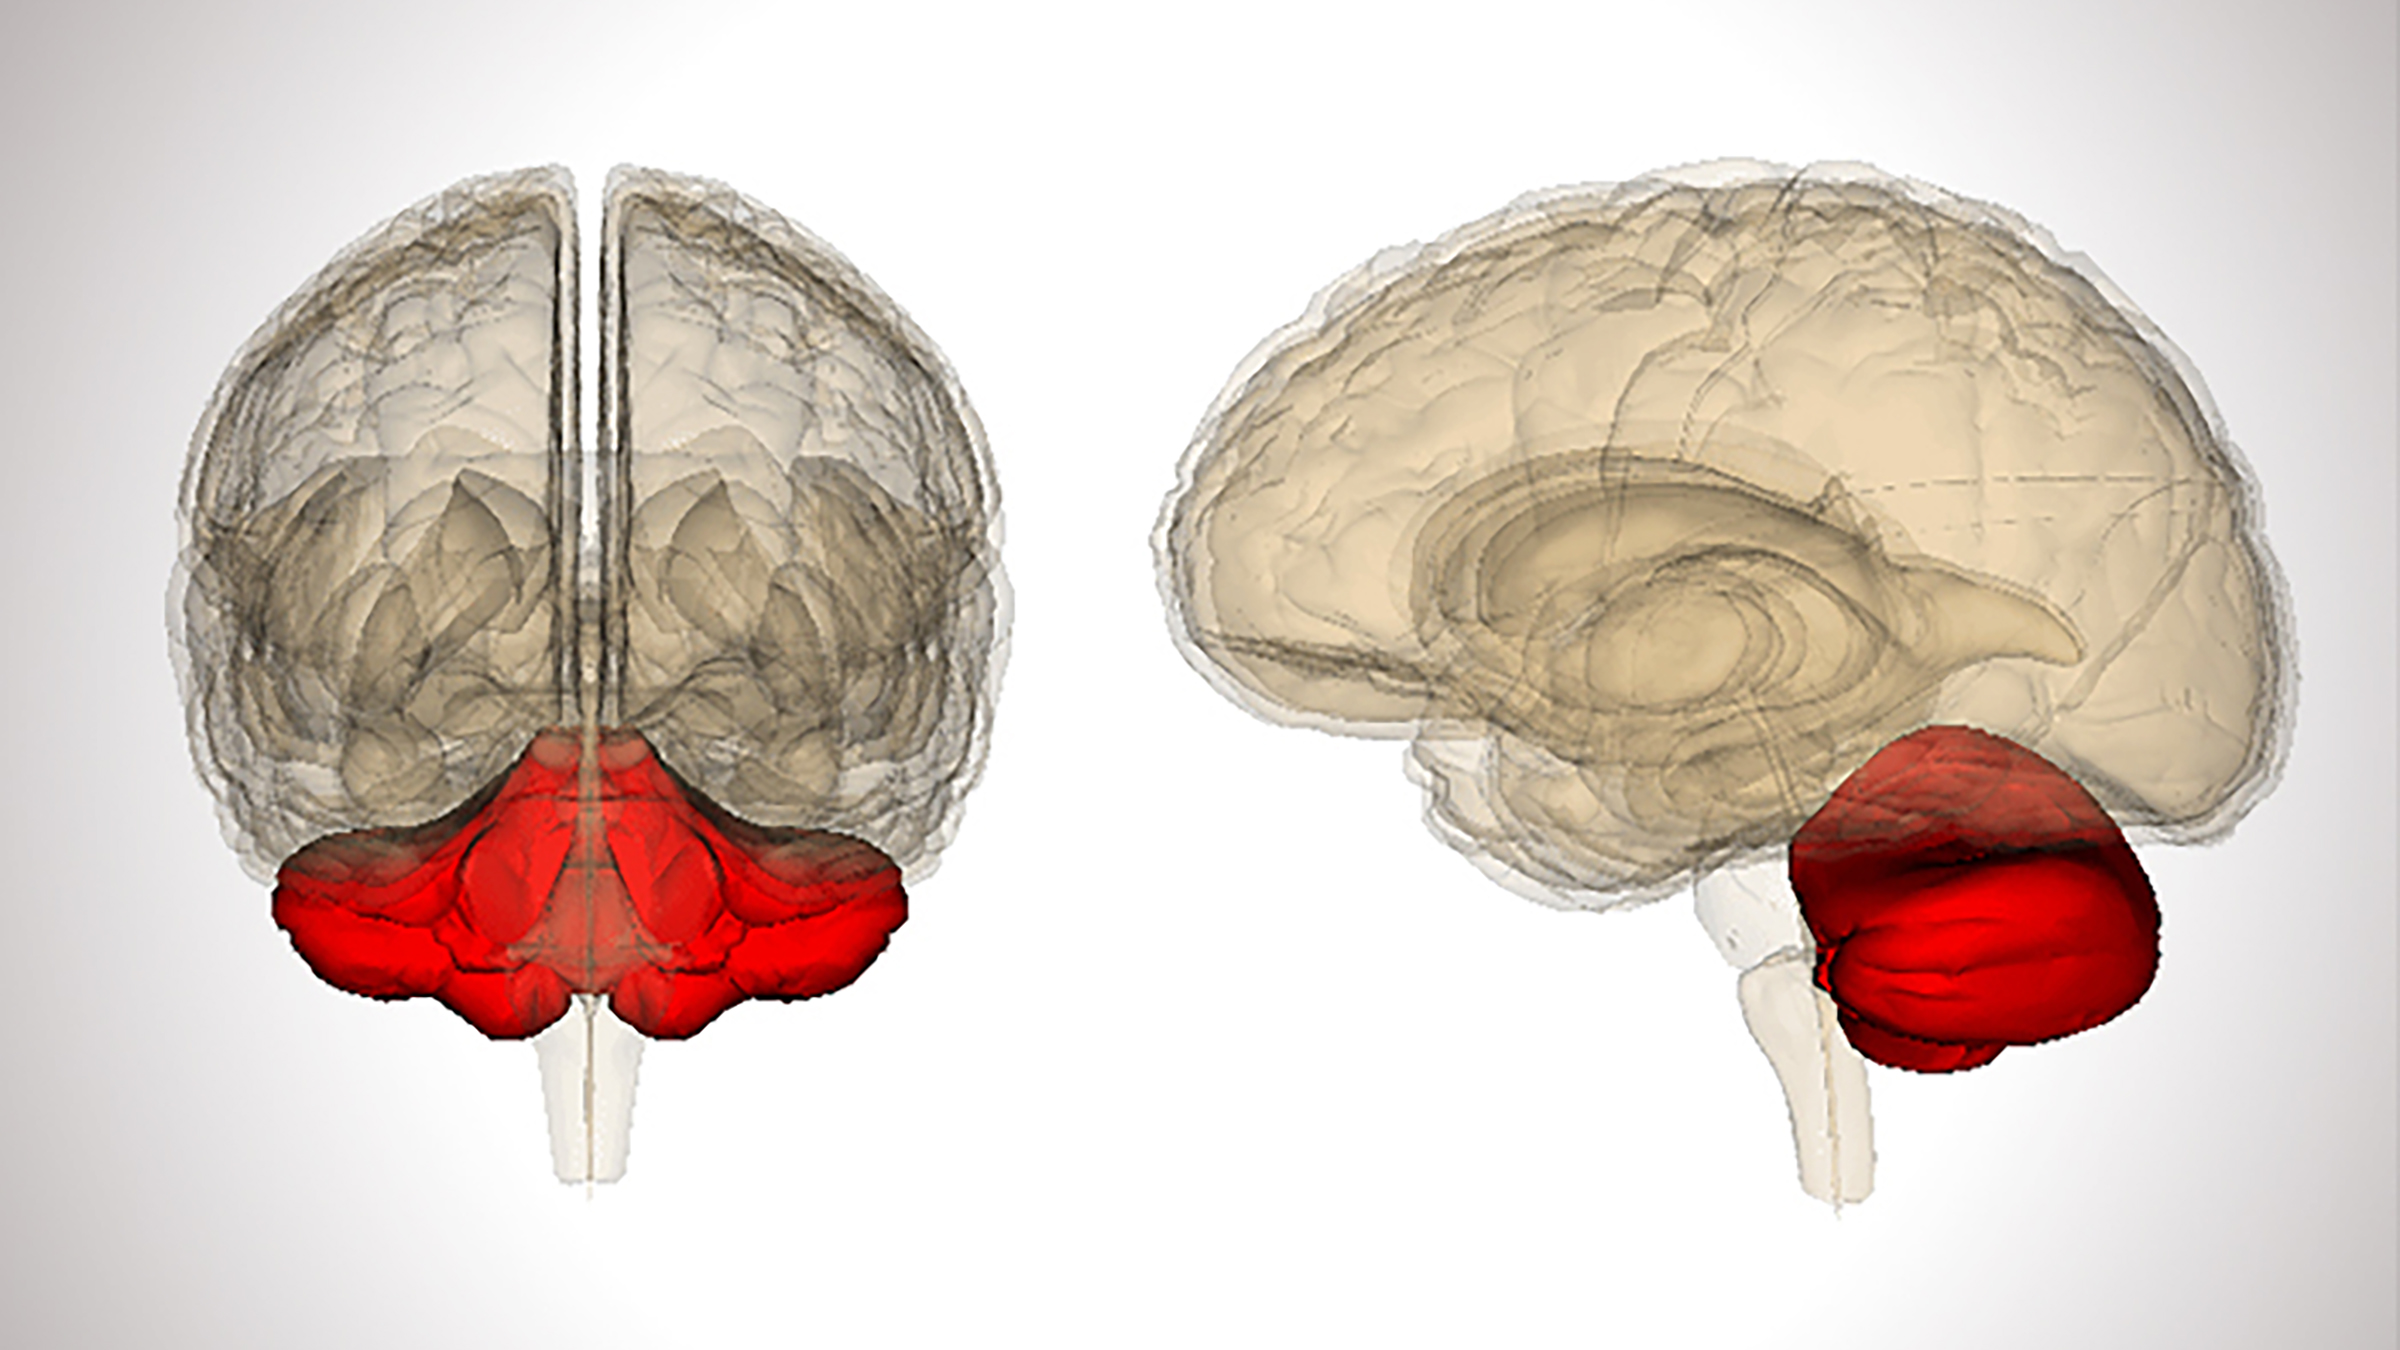 Two semi-transparent illustrations of a brain with the cerebellum highlighted in red